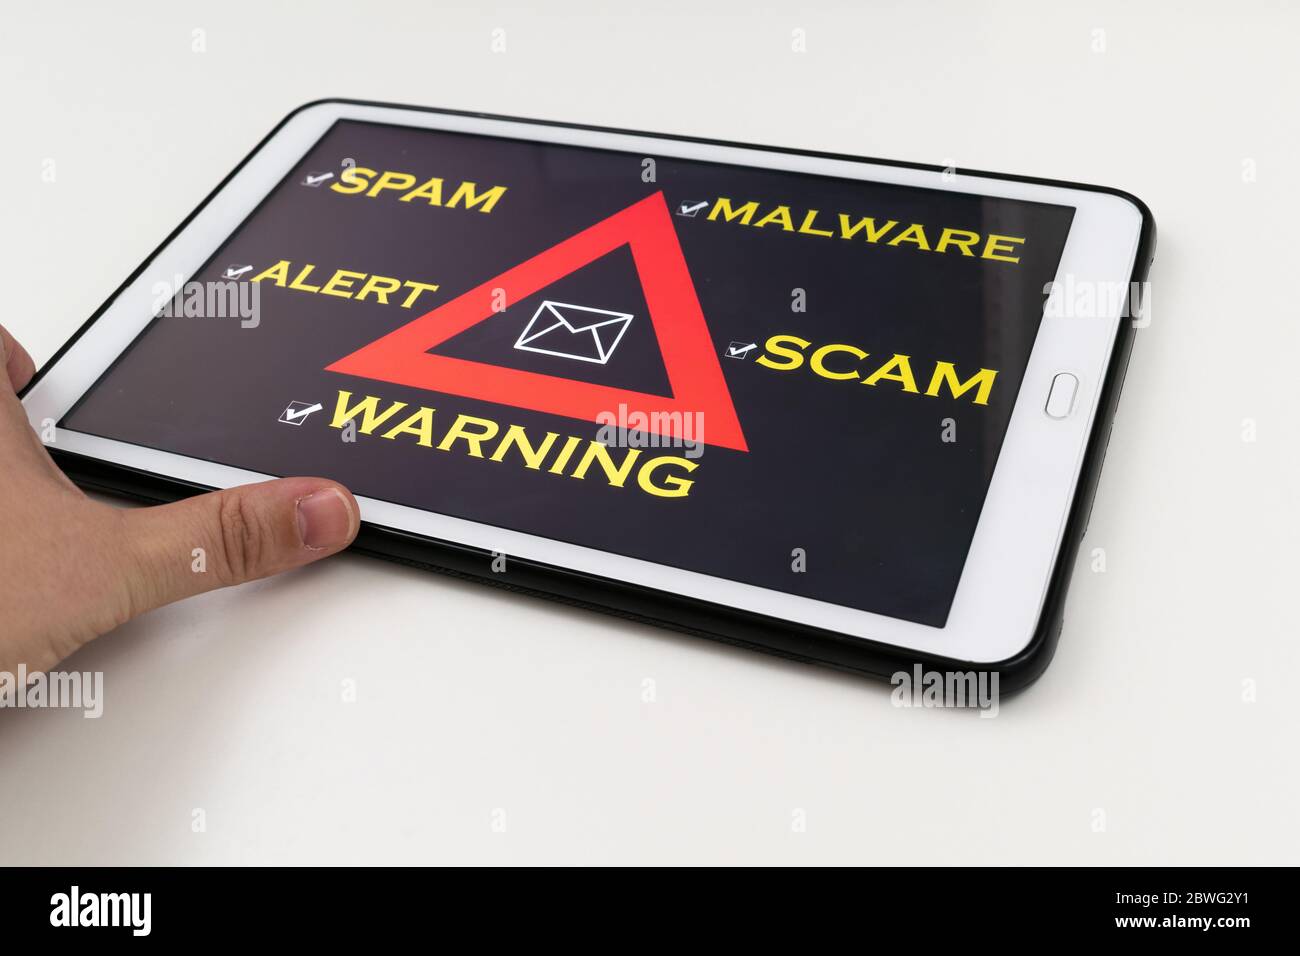 internet spam scam security Stock Photo